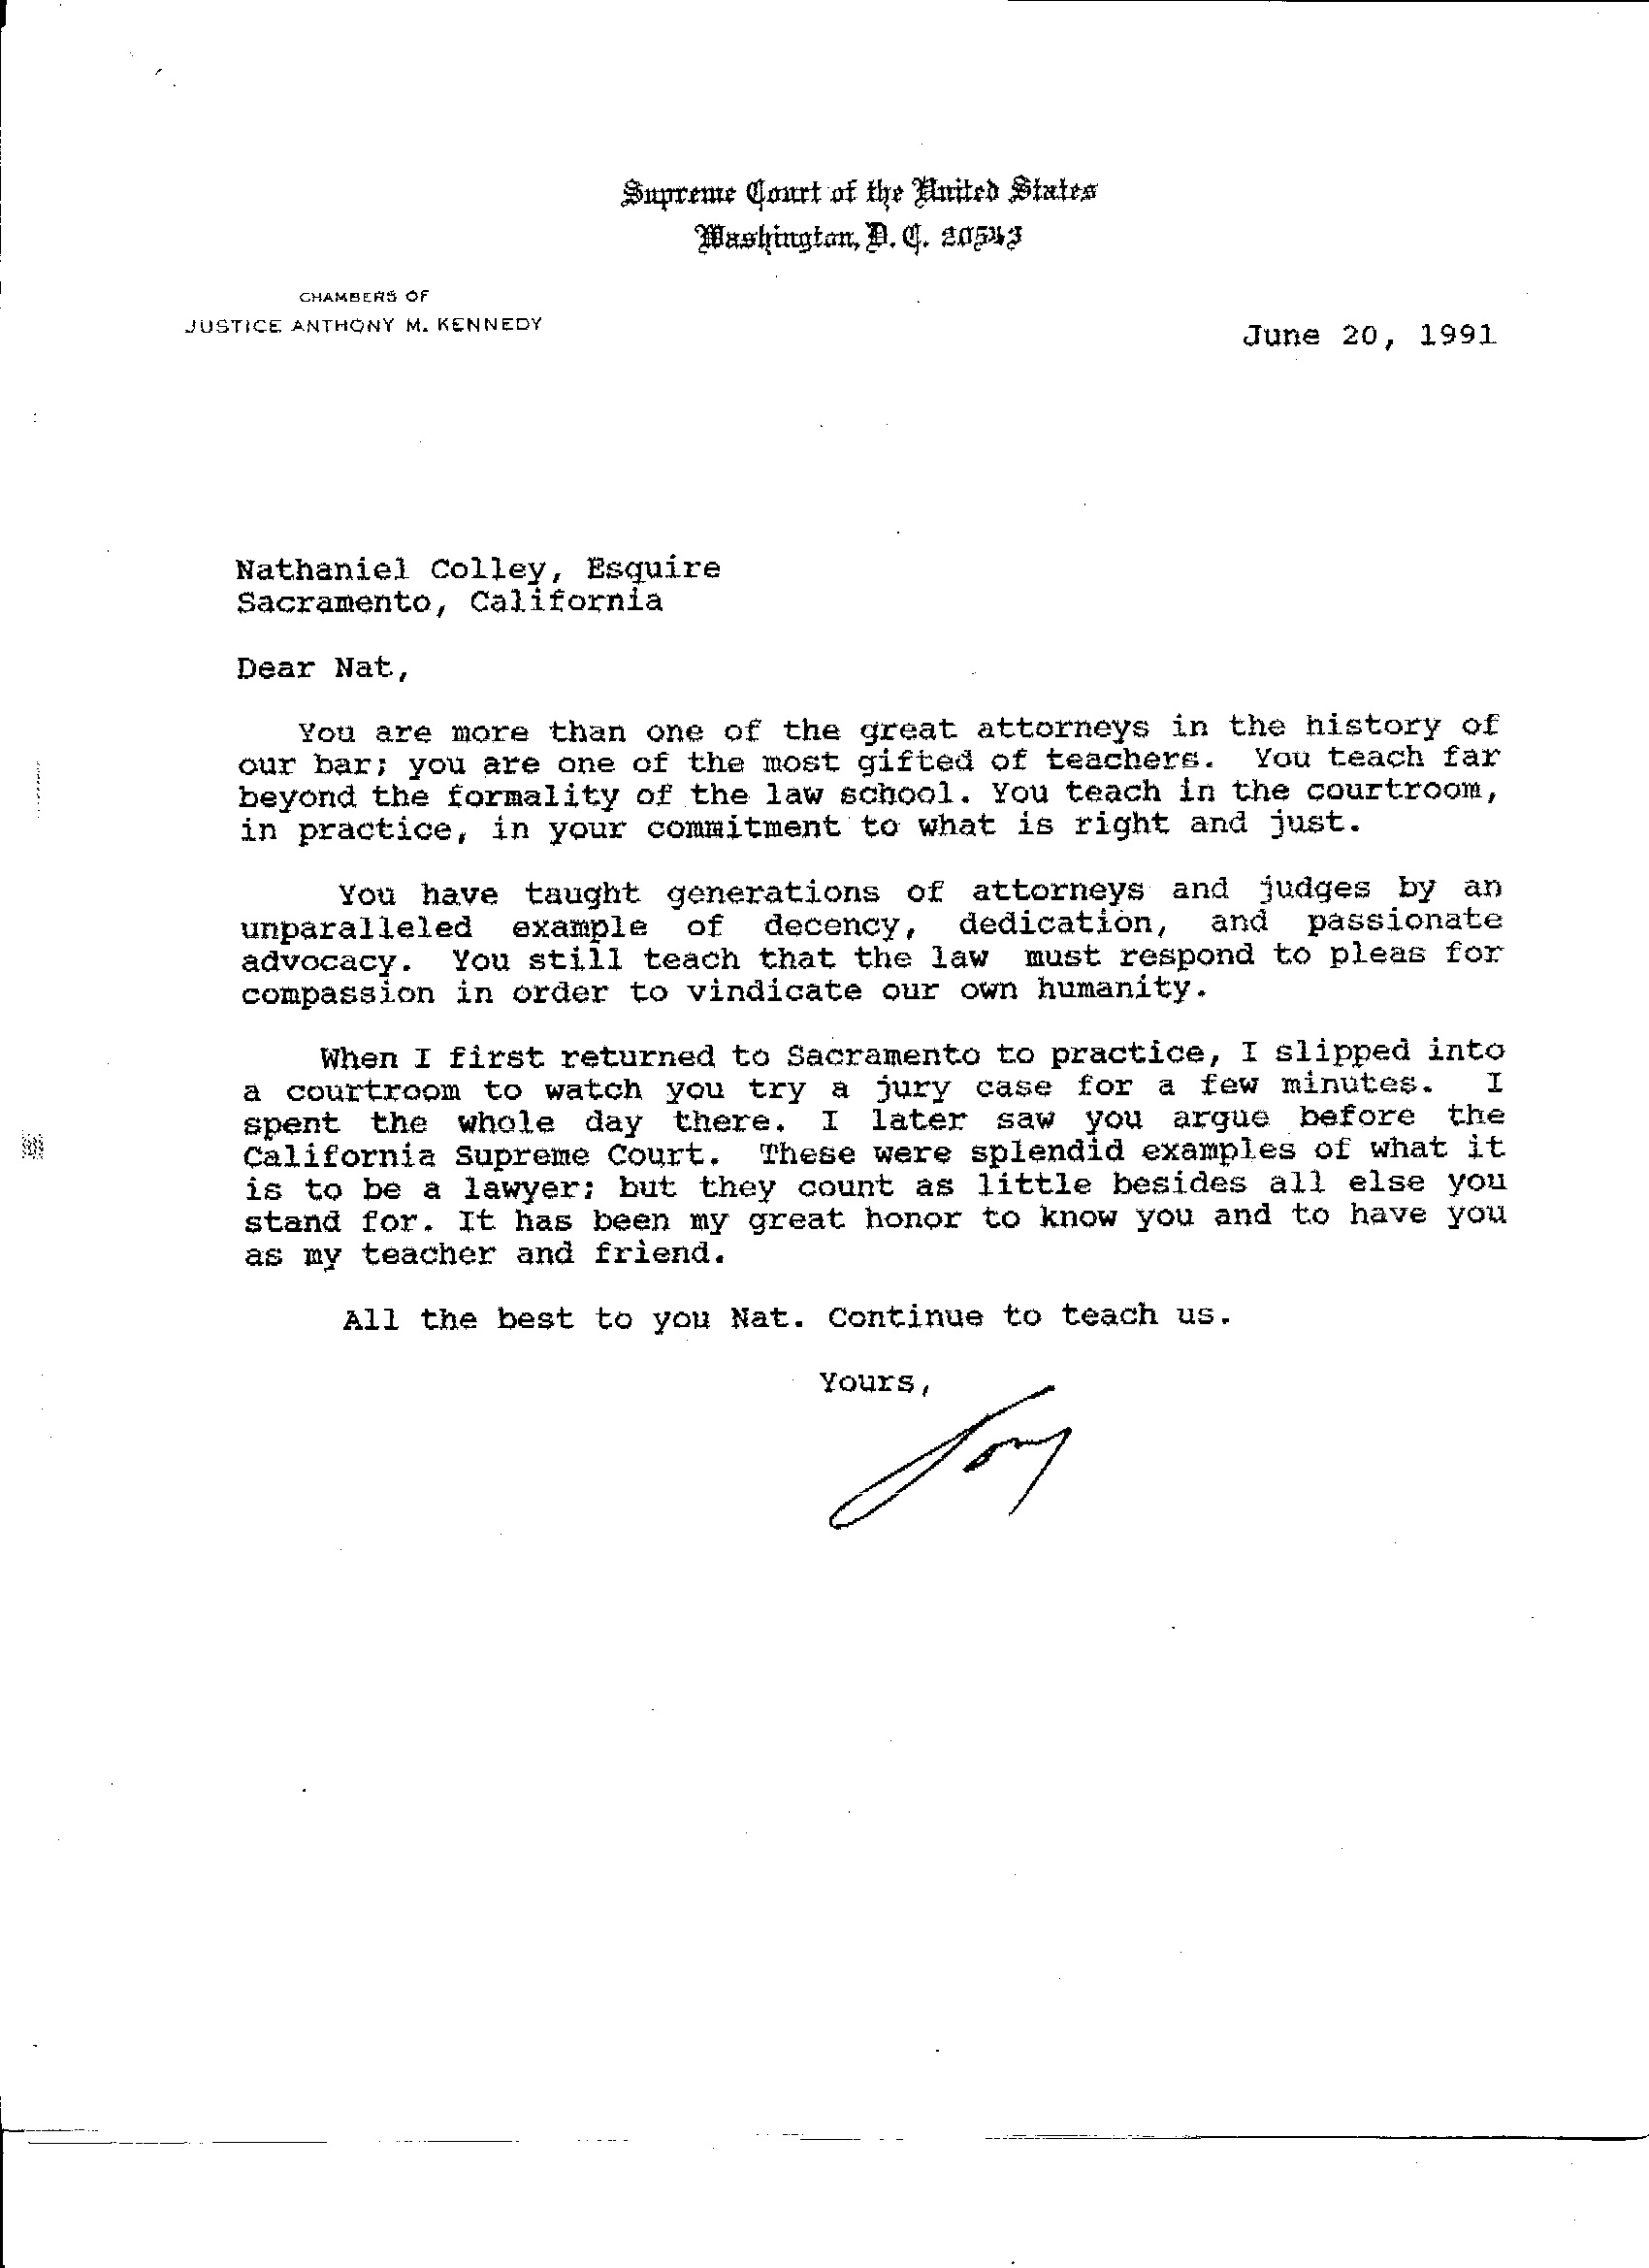 0613 Anthony Kennedy Letter To Nathanial Colley